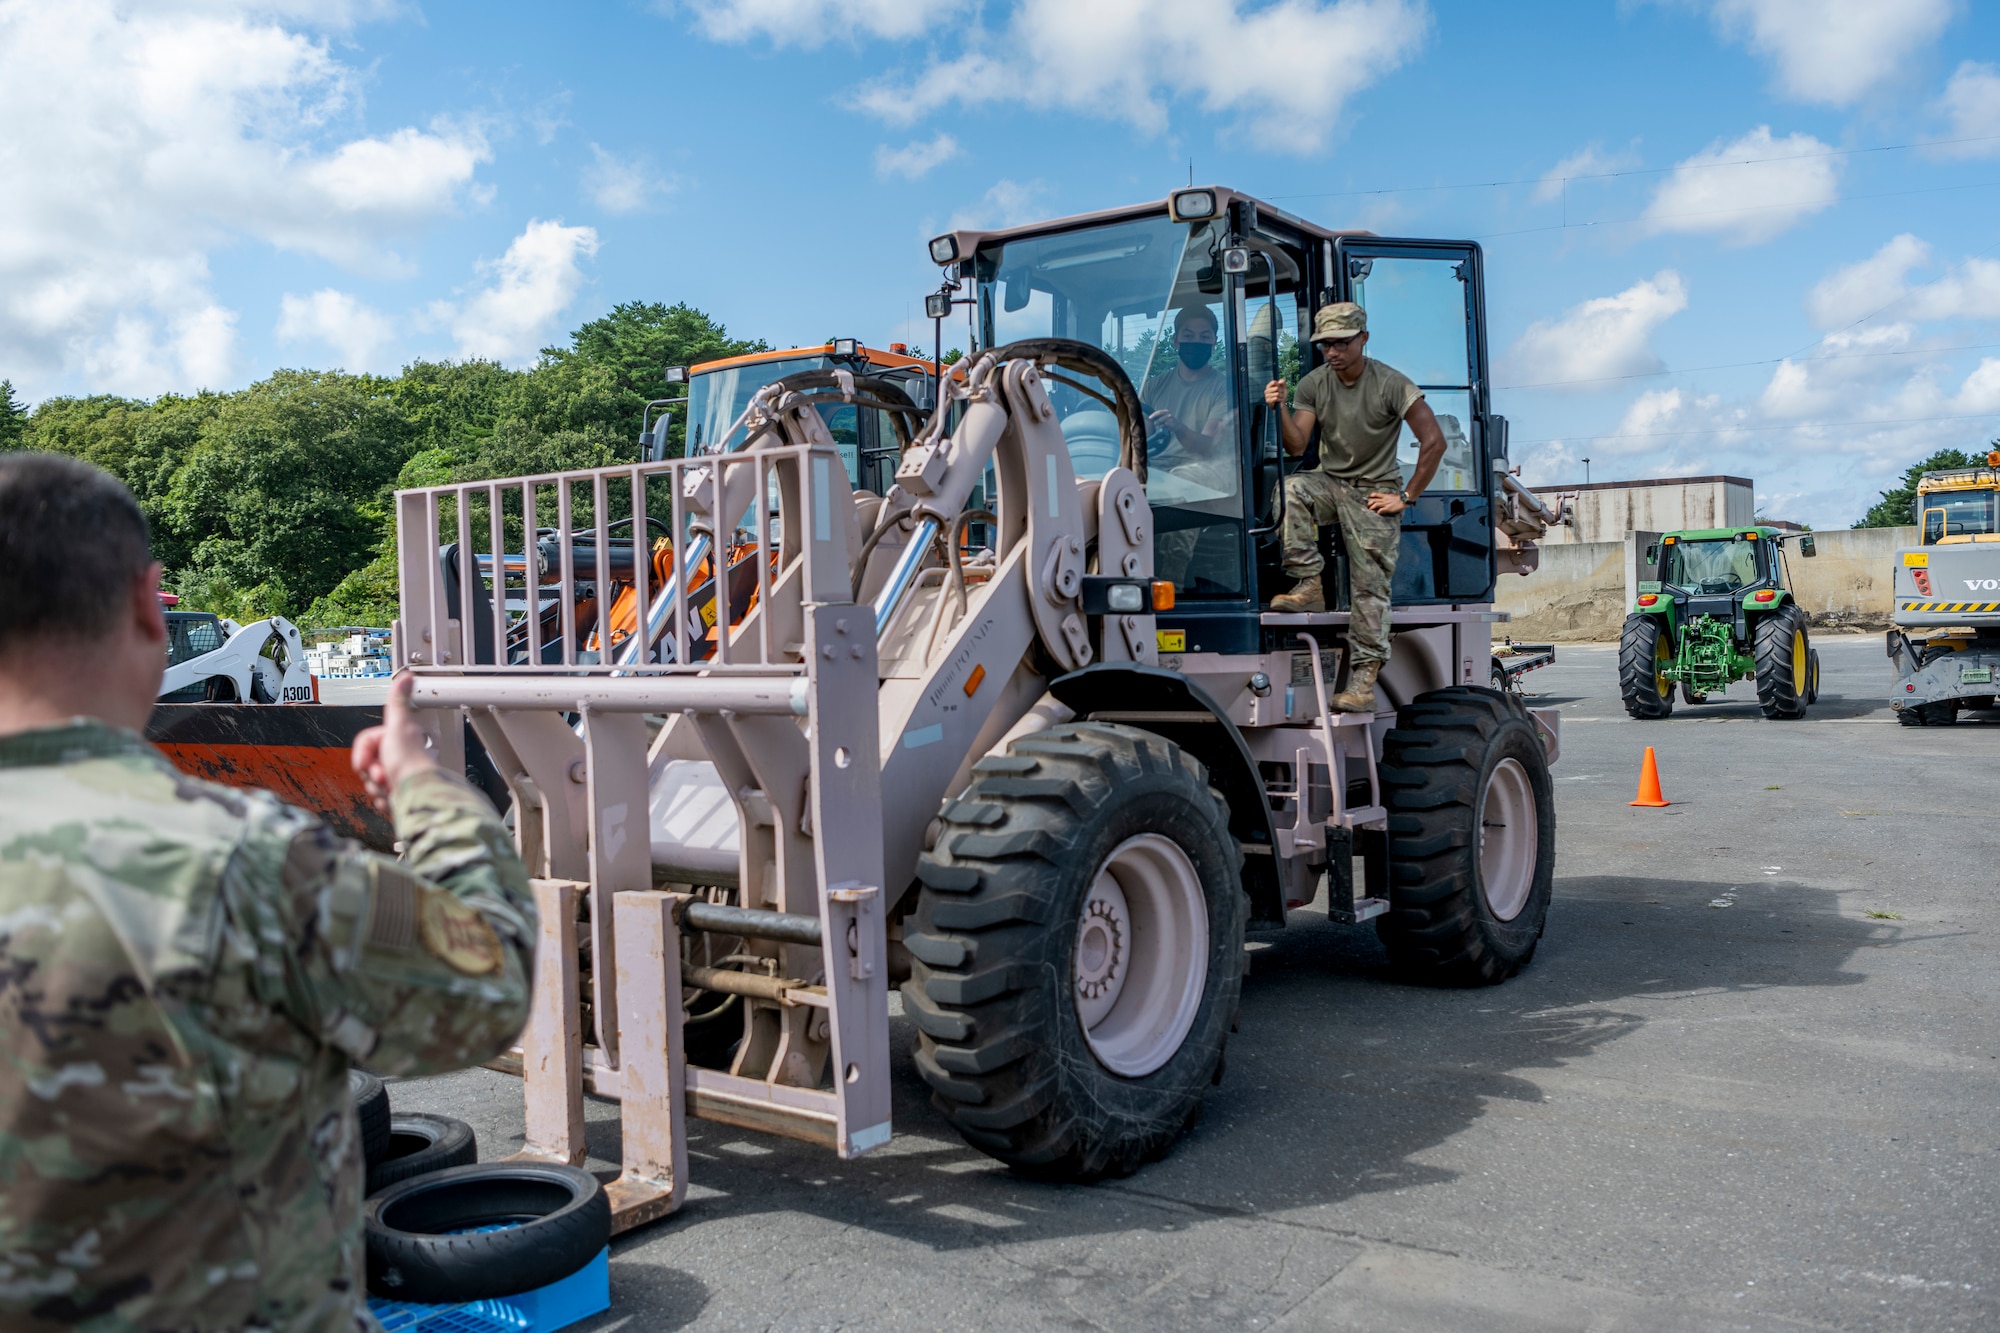 People in uniform operate a large forklift.